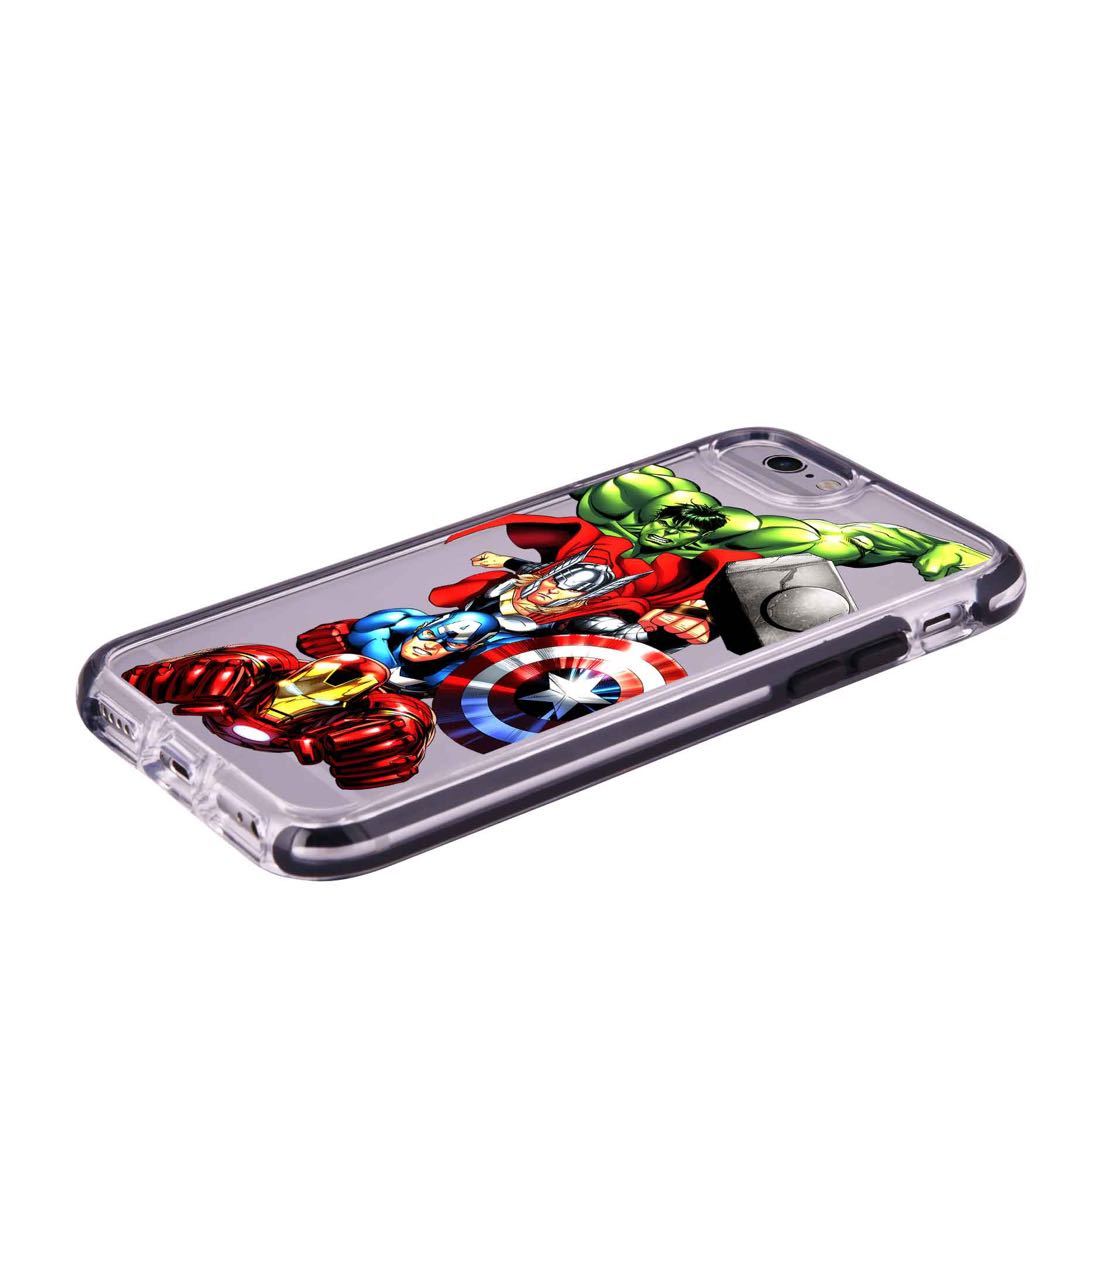 Avengers Fury - Extreme Phone Case for iPhone 6 Plus